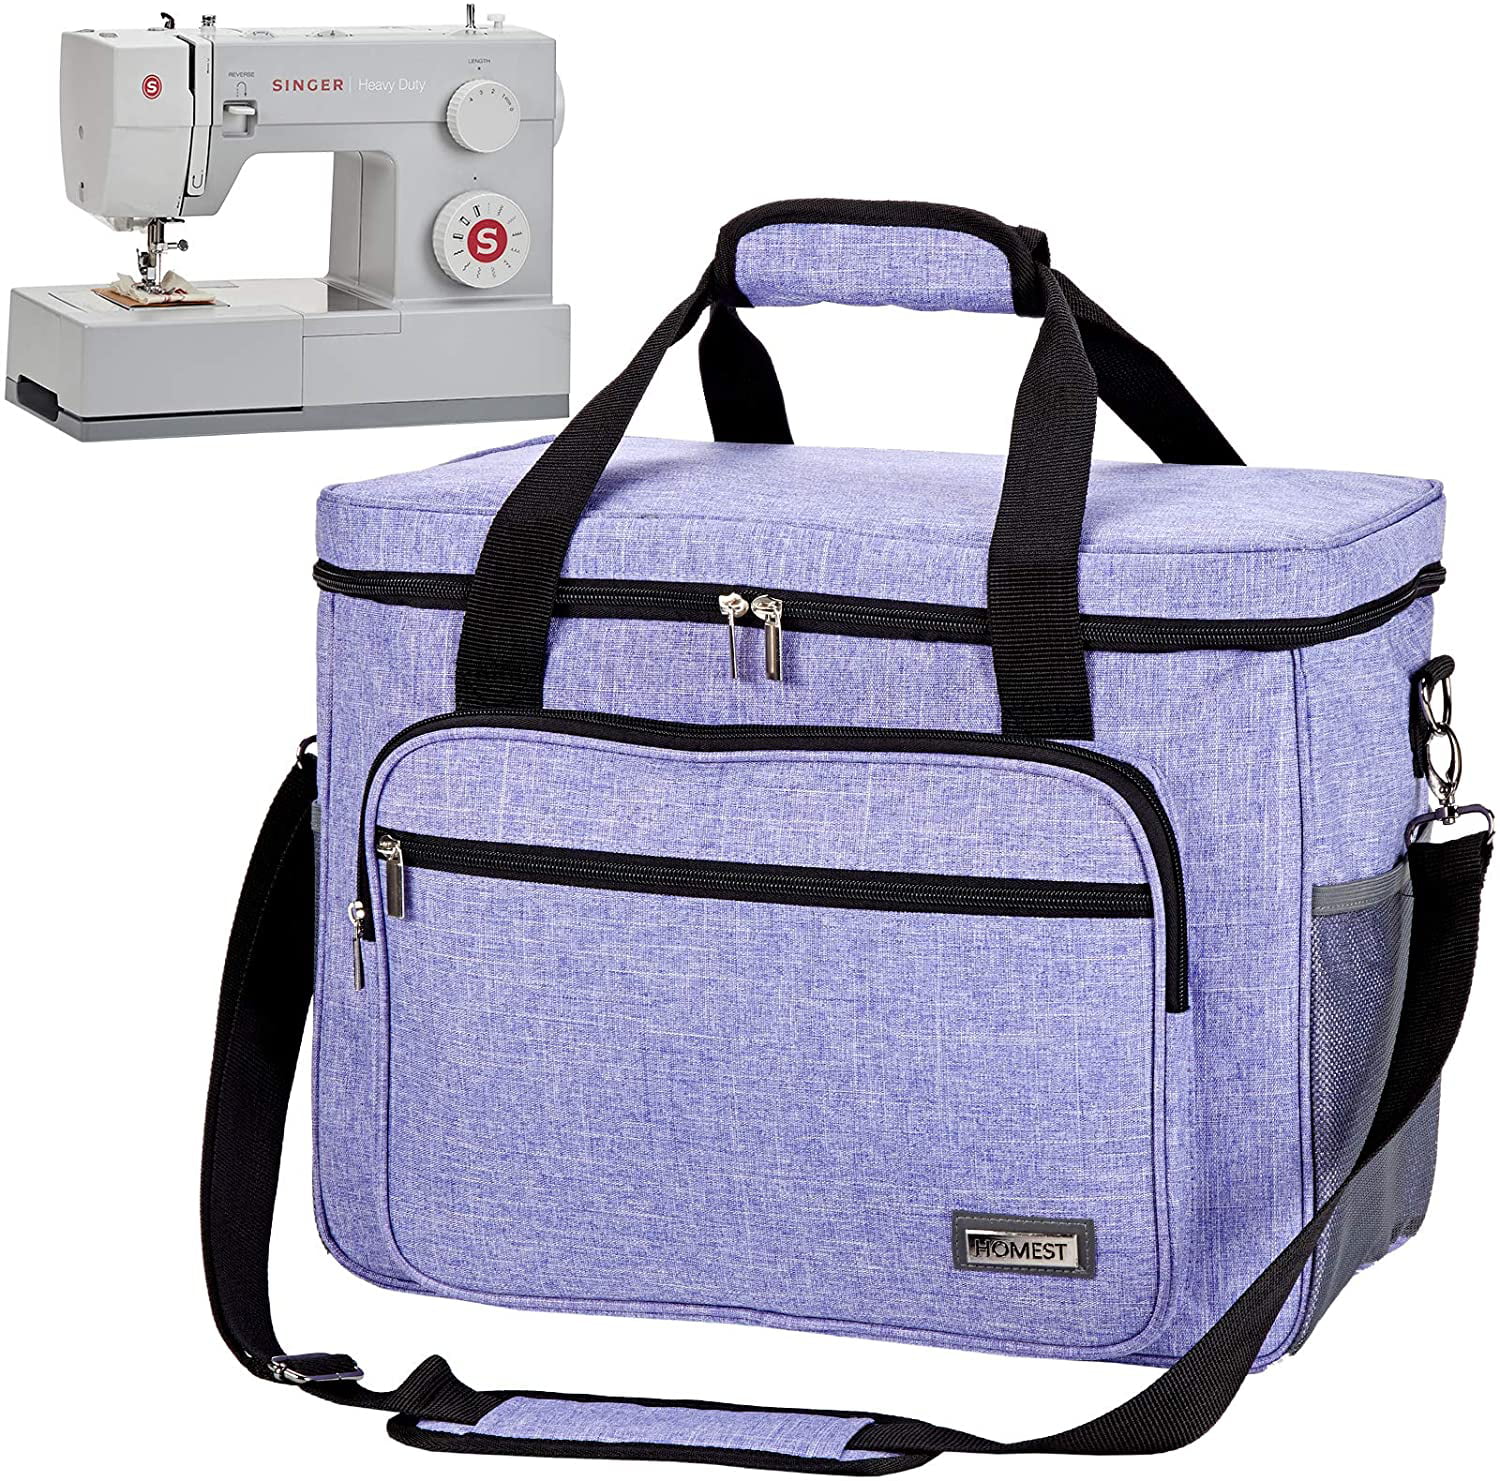 HOMEST Universal Sewing Machine Carrying Case with Side Pockets for Sewing Supplies Grey 